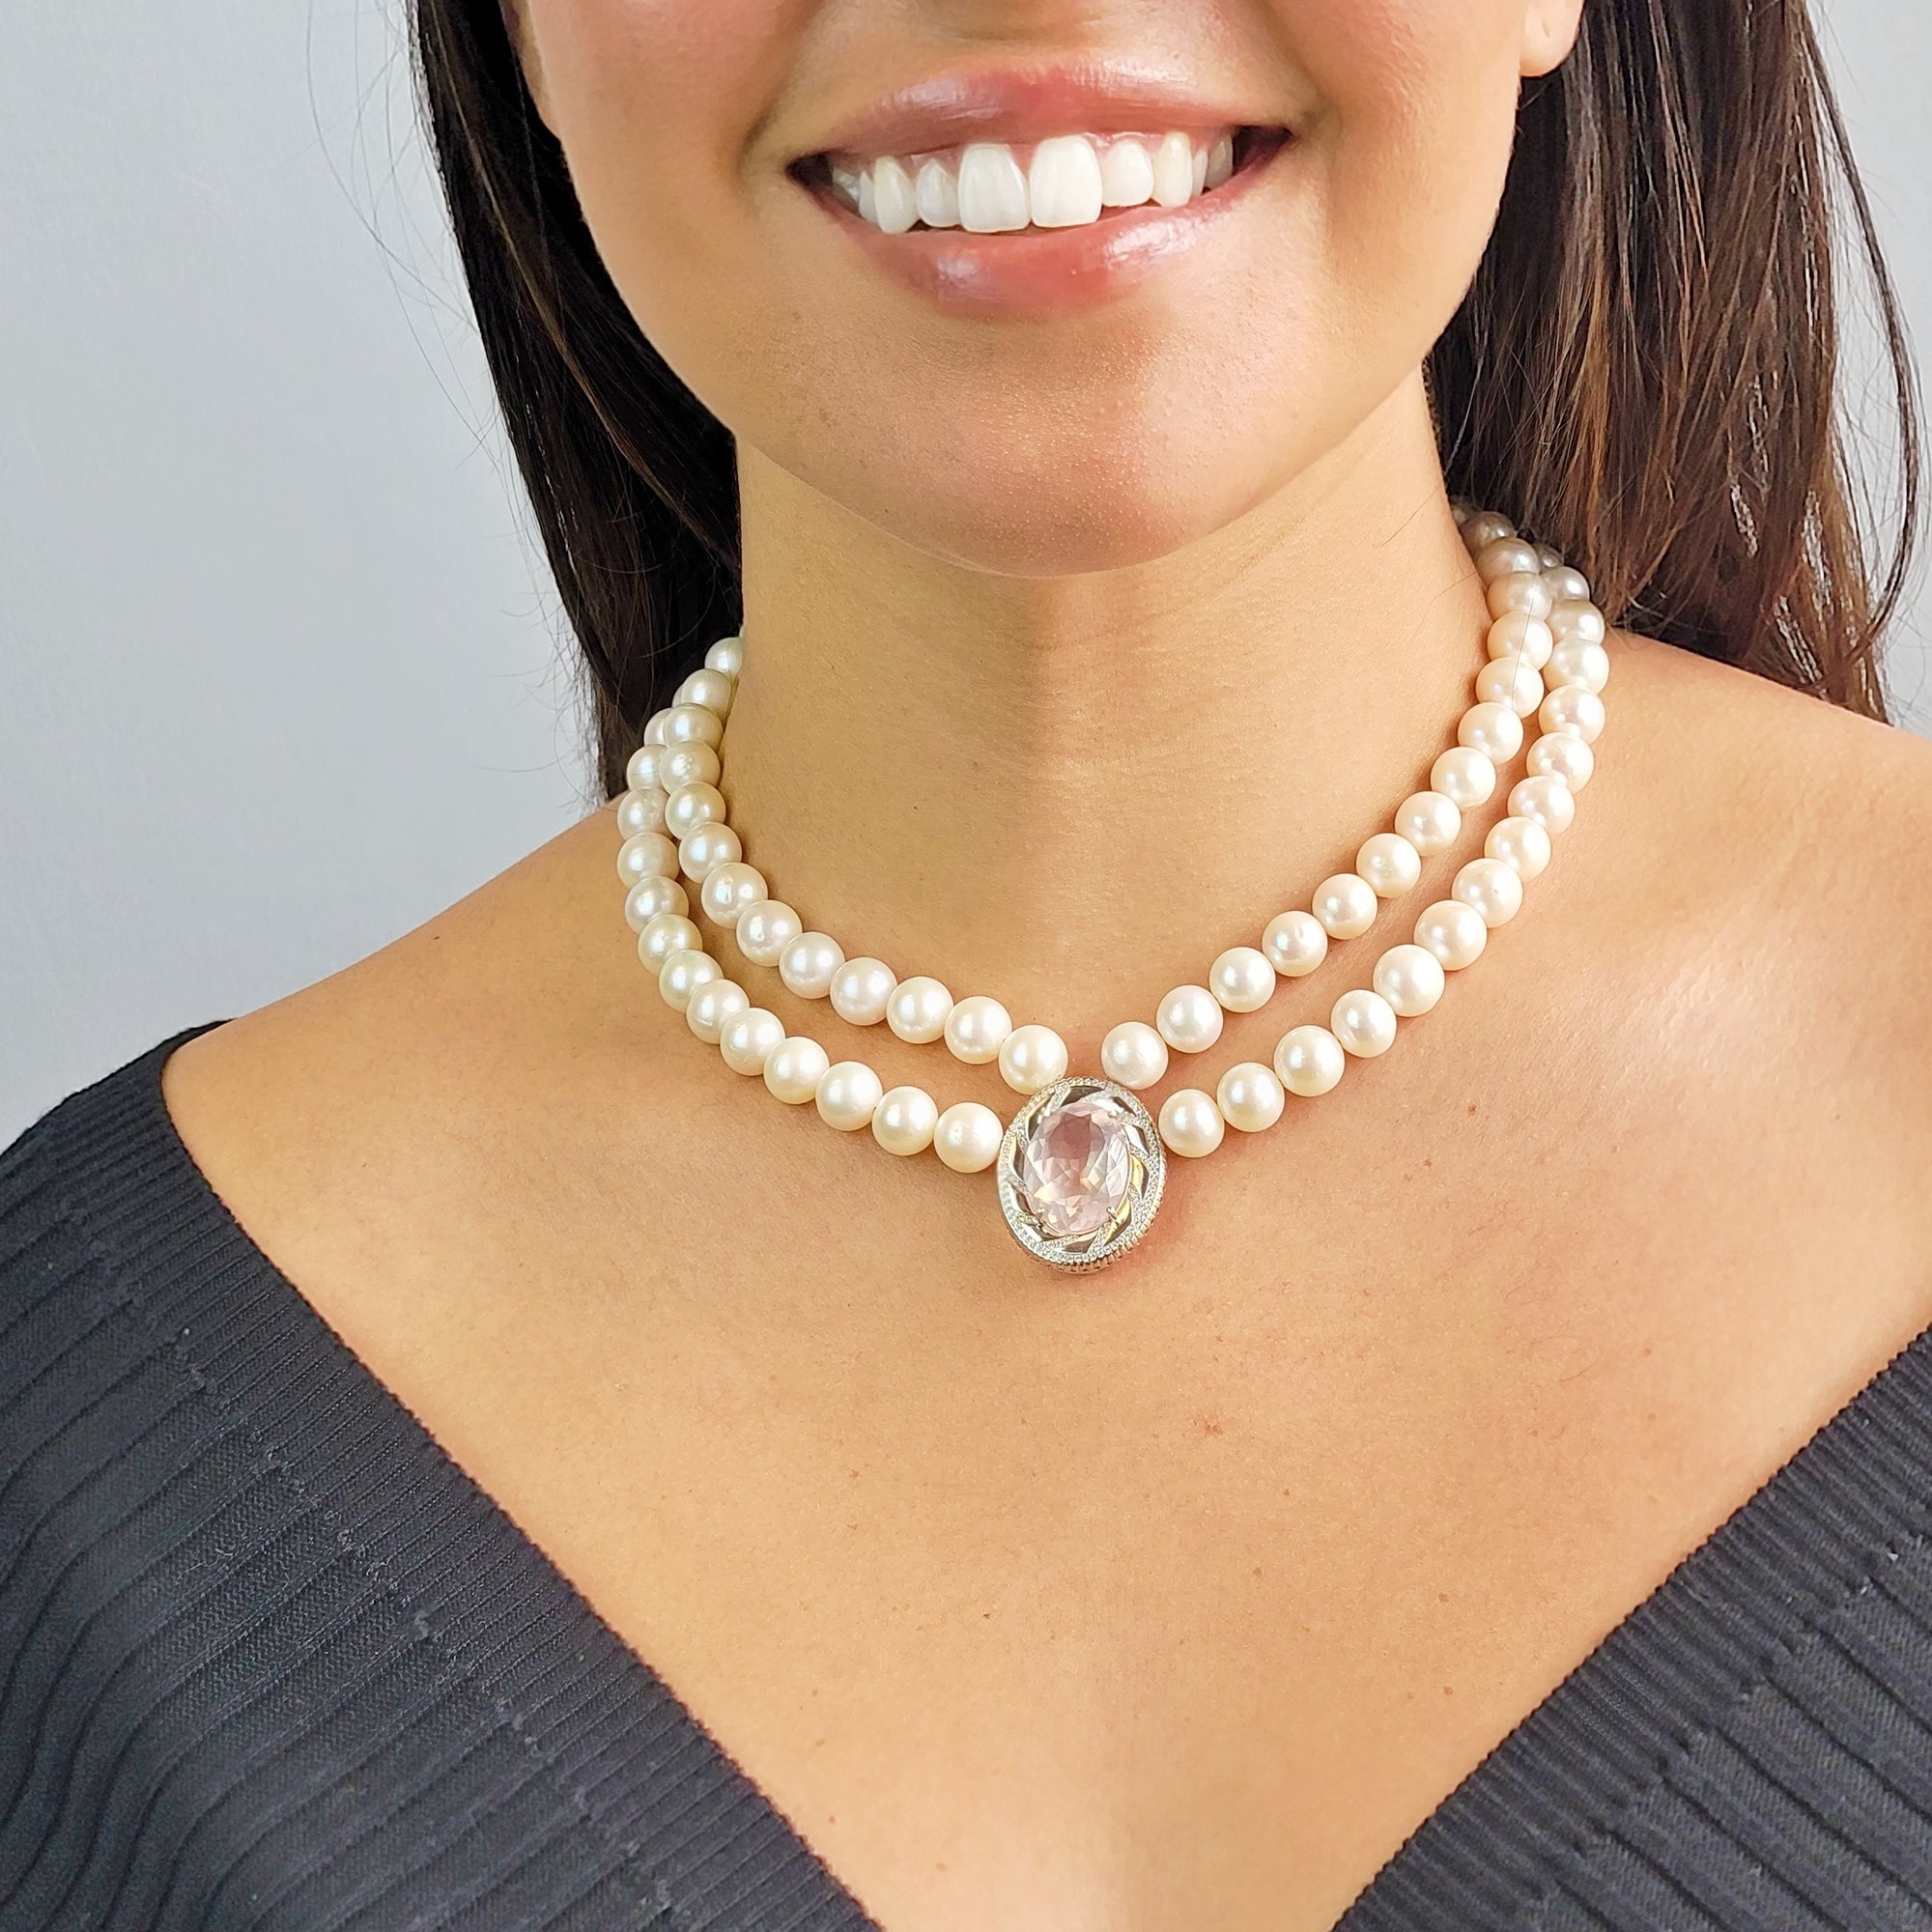 Real Rose Quartz and Pearl Necklace